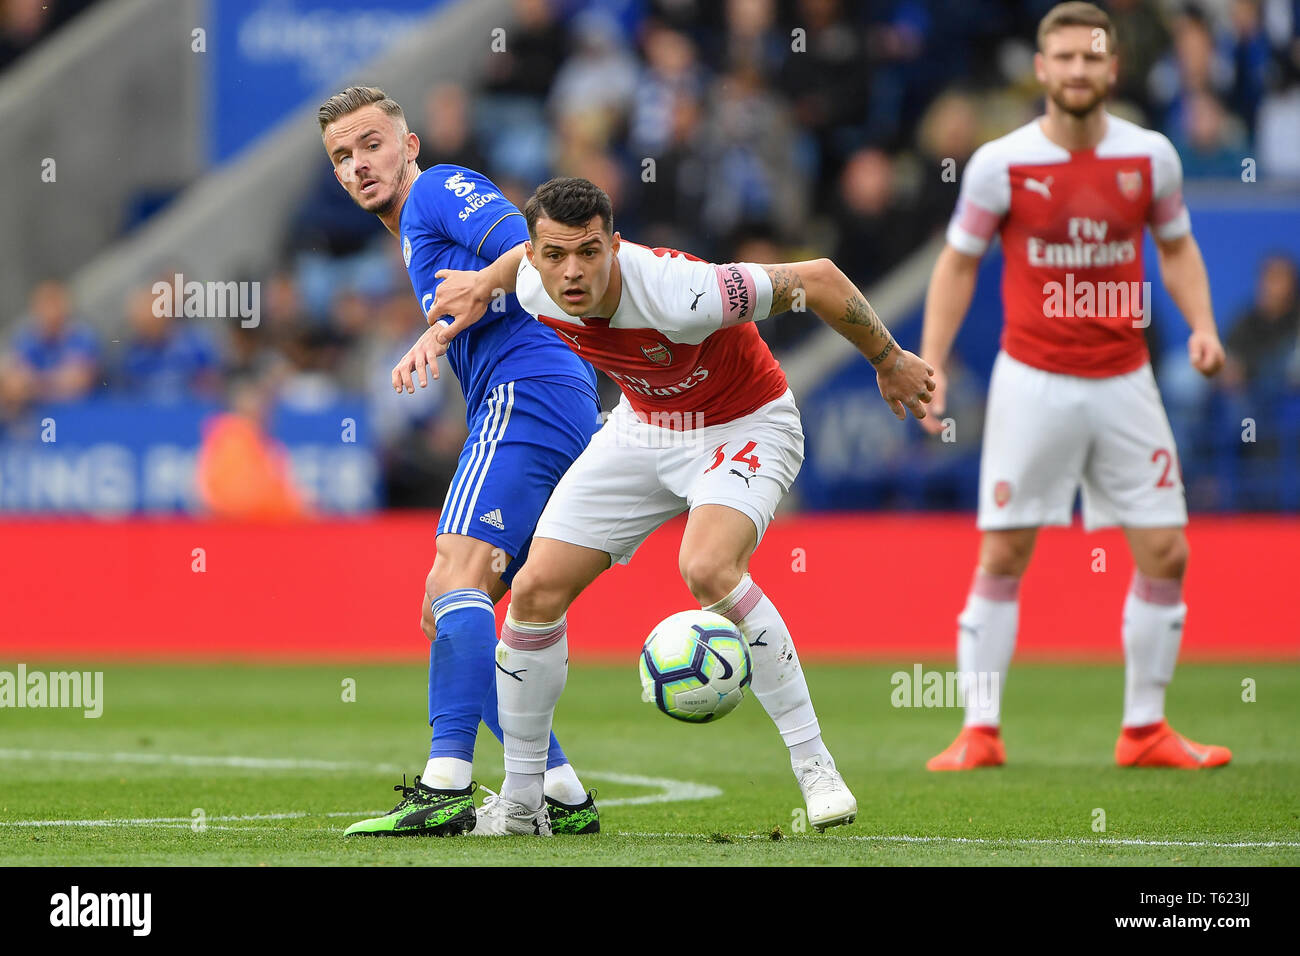 Leicester, UK. 28th April 2019. Granit Xhaka (34) of Arsenal battles with Leicester, UK. 28th April 2019. Leicester City midfielder James Maddison (10) during the Premier League match between Leicester, UK. 28th April 2019. Leicester City and Arsenal at the King Power Stadium, Leicester on Sunday 28th April 2019.   Editorial use only, license required for commercial use. No use in betting, games or a single club/league/player publications. Photograph may only be used for newspaper and/or magazine editorial purposes. Credit: MI News & Sport /Alamy Live News Stock Photo